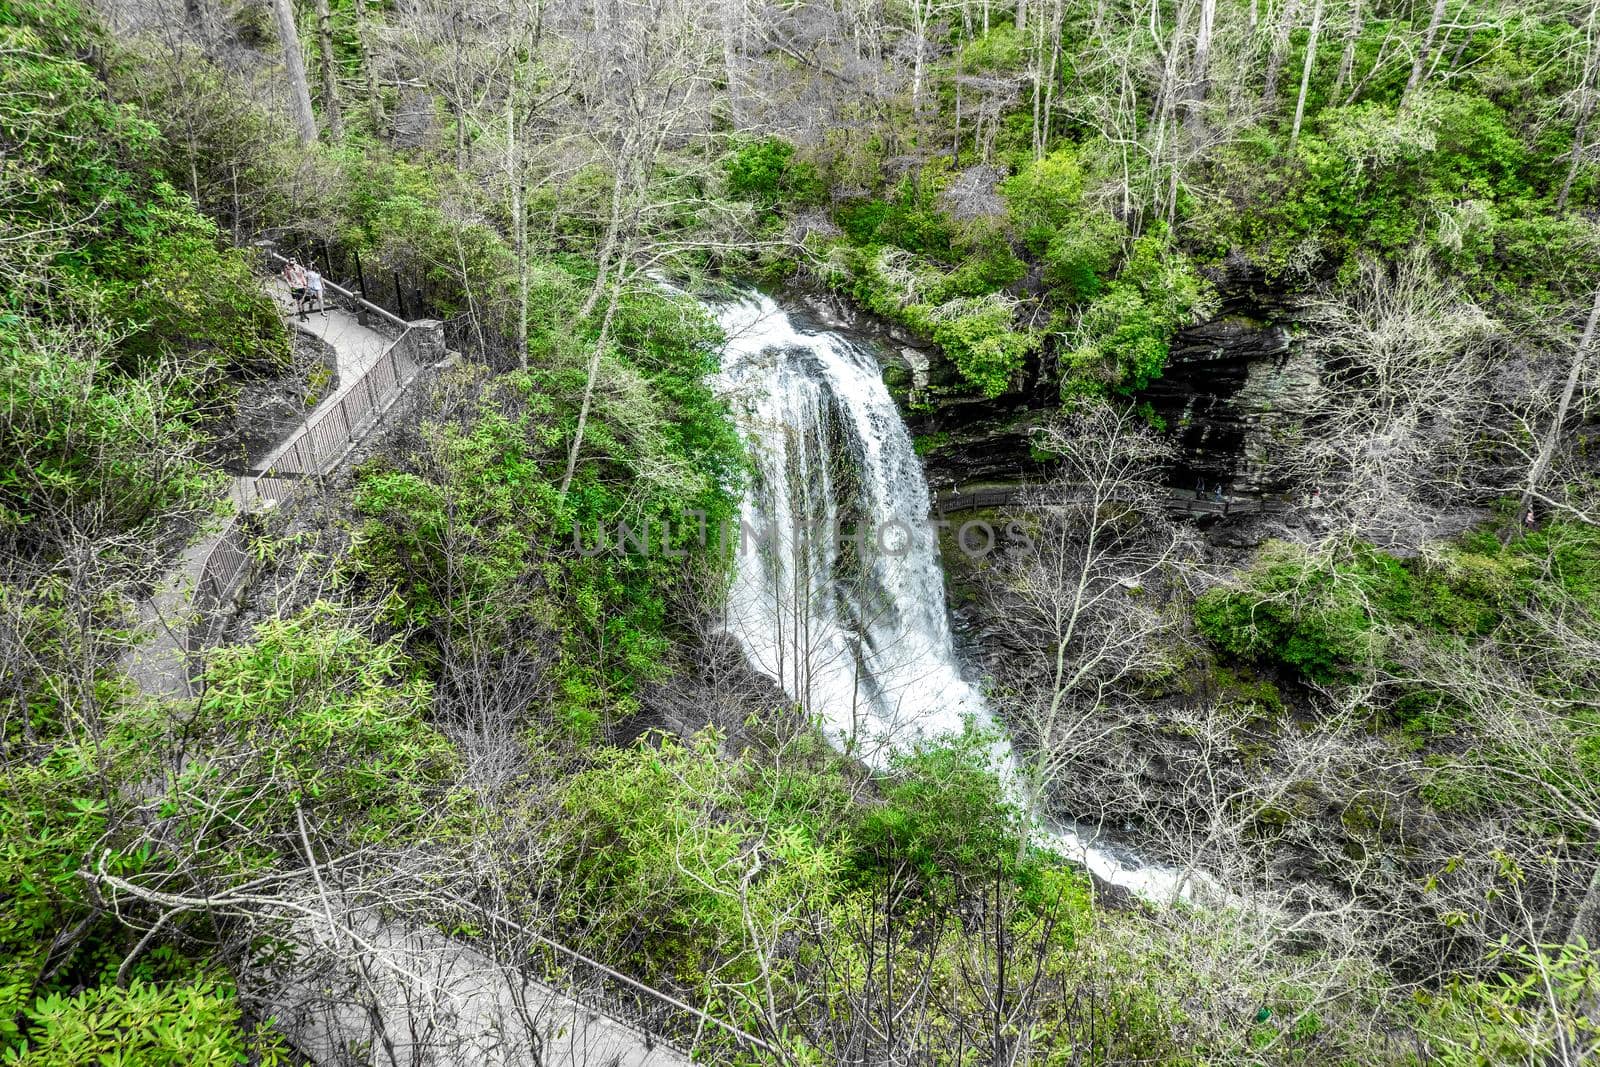 dry falls is a scenic 65 foot waterfall in highlands north carolina